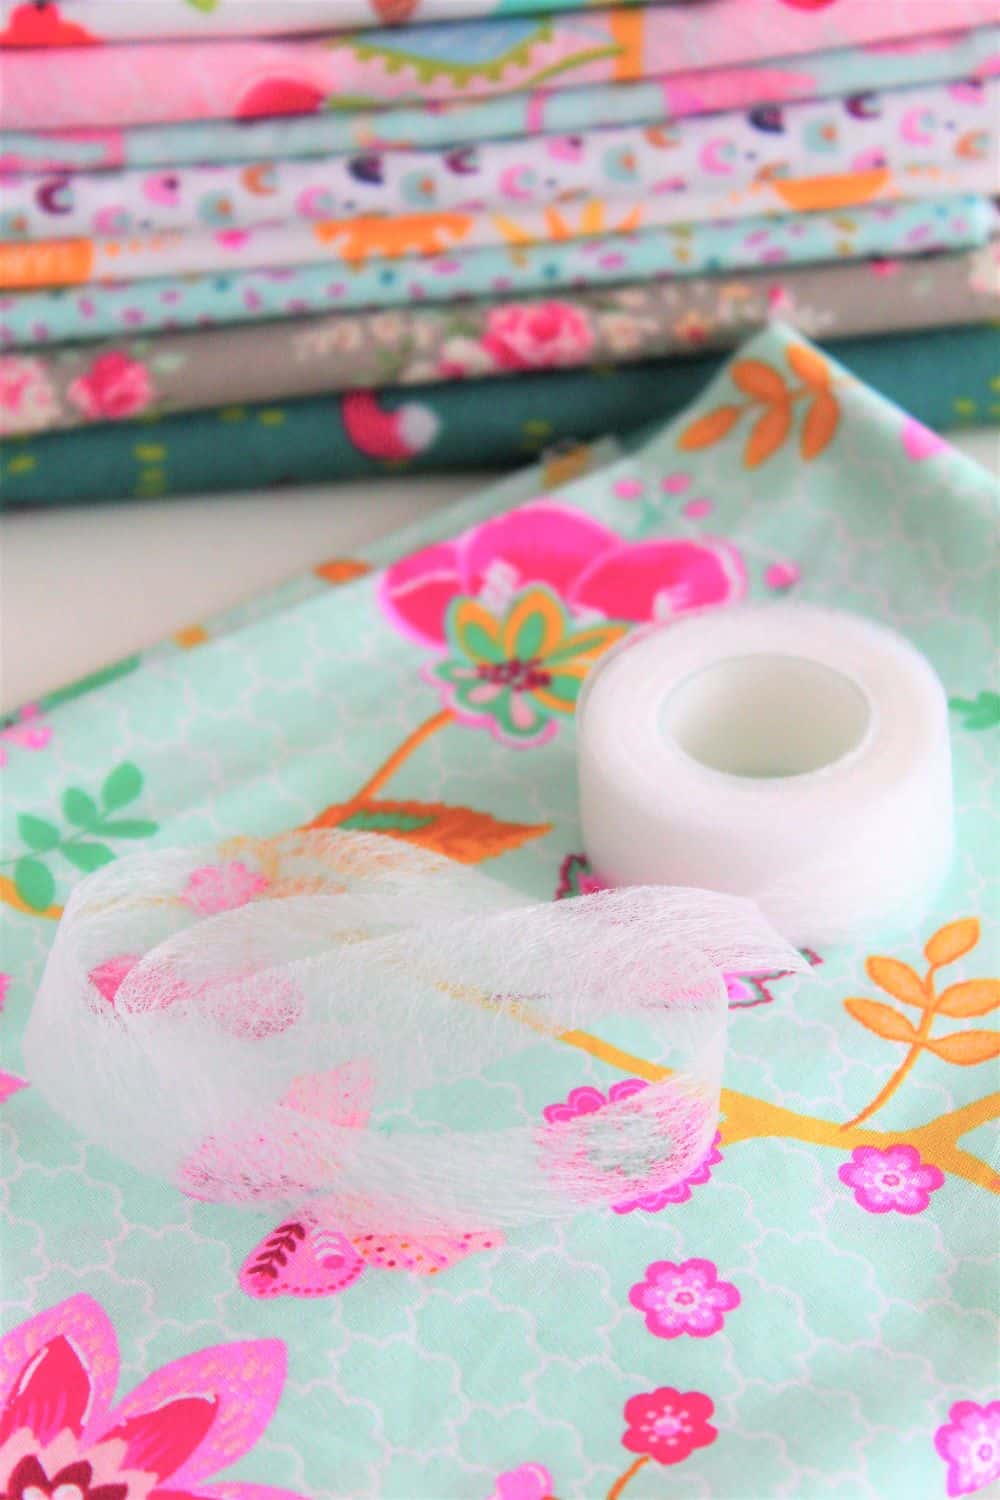 How to use hemming tape in sewing